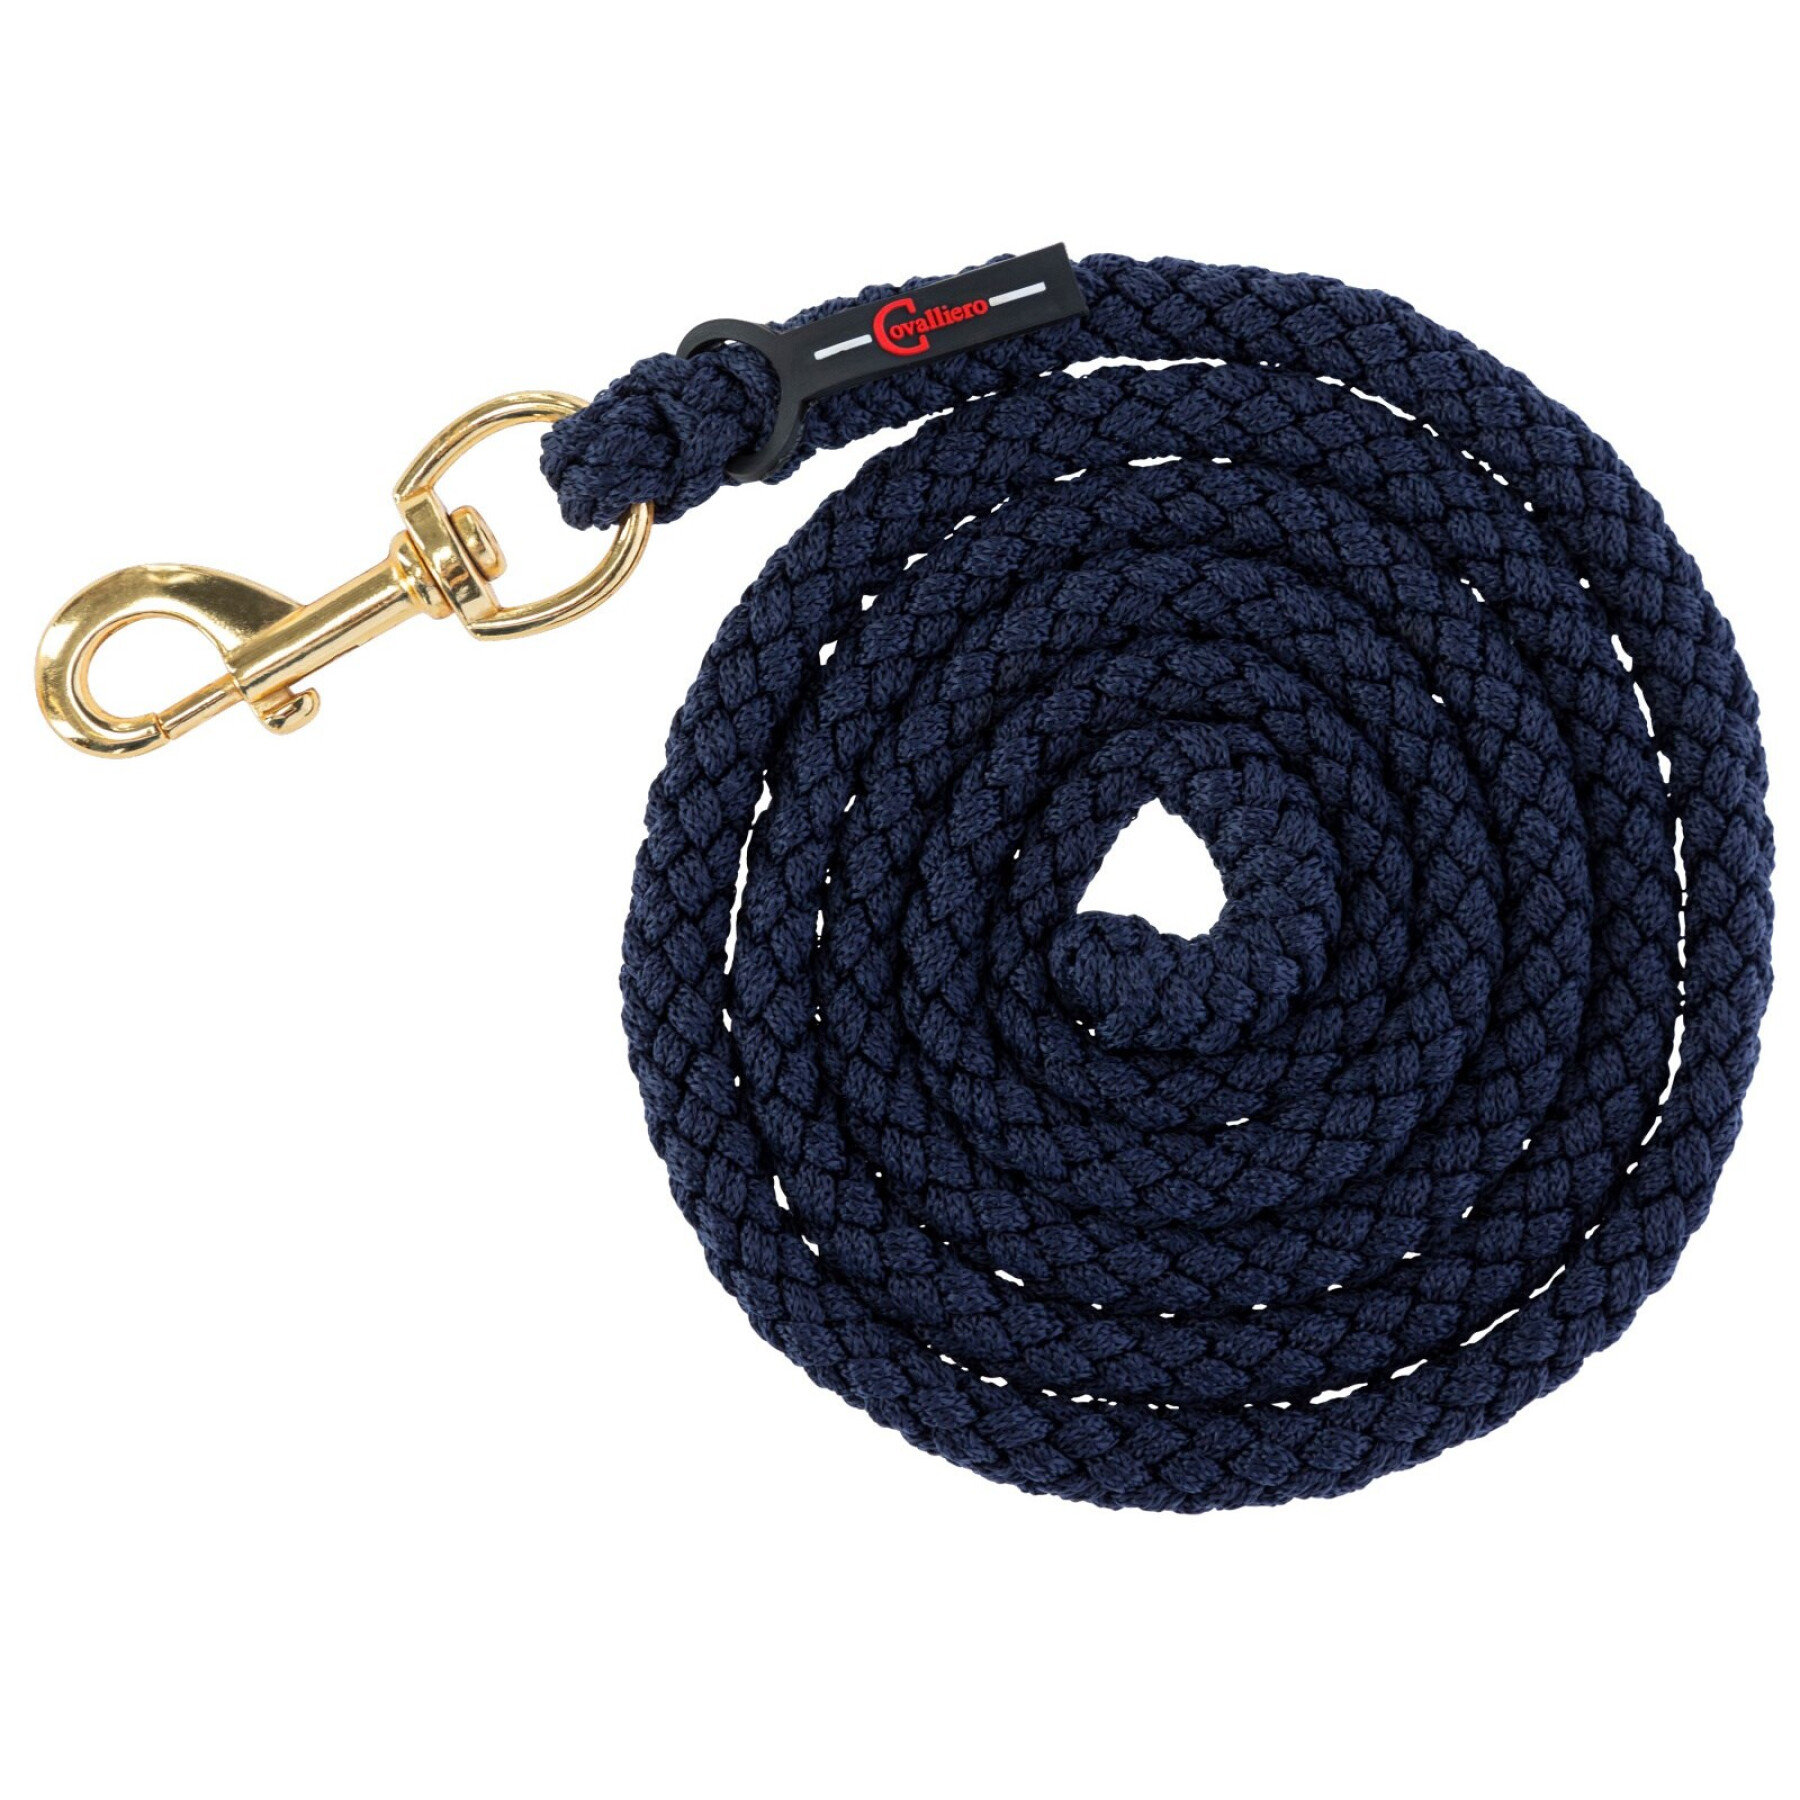 Riding lanyard with snap hook Covalliero TopLine